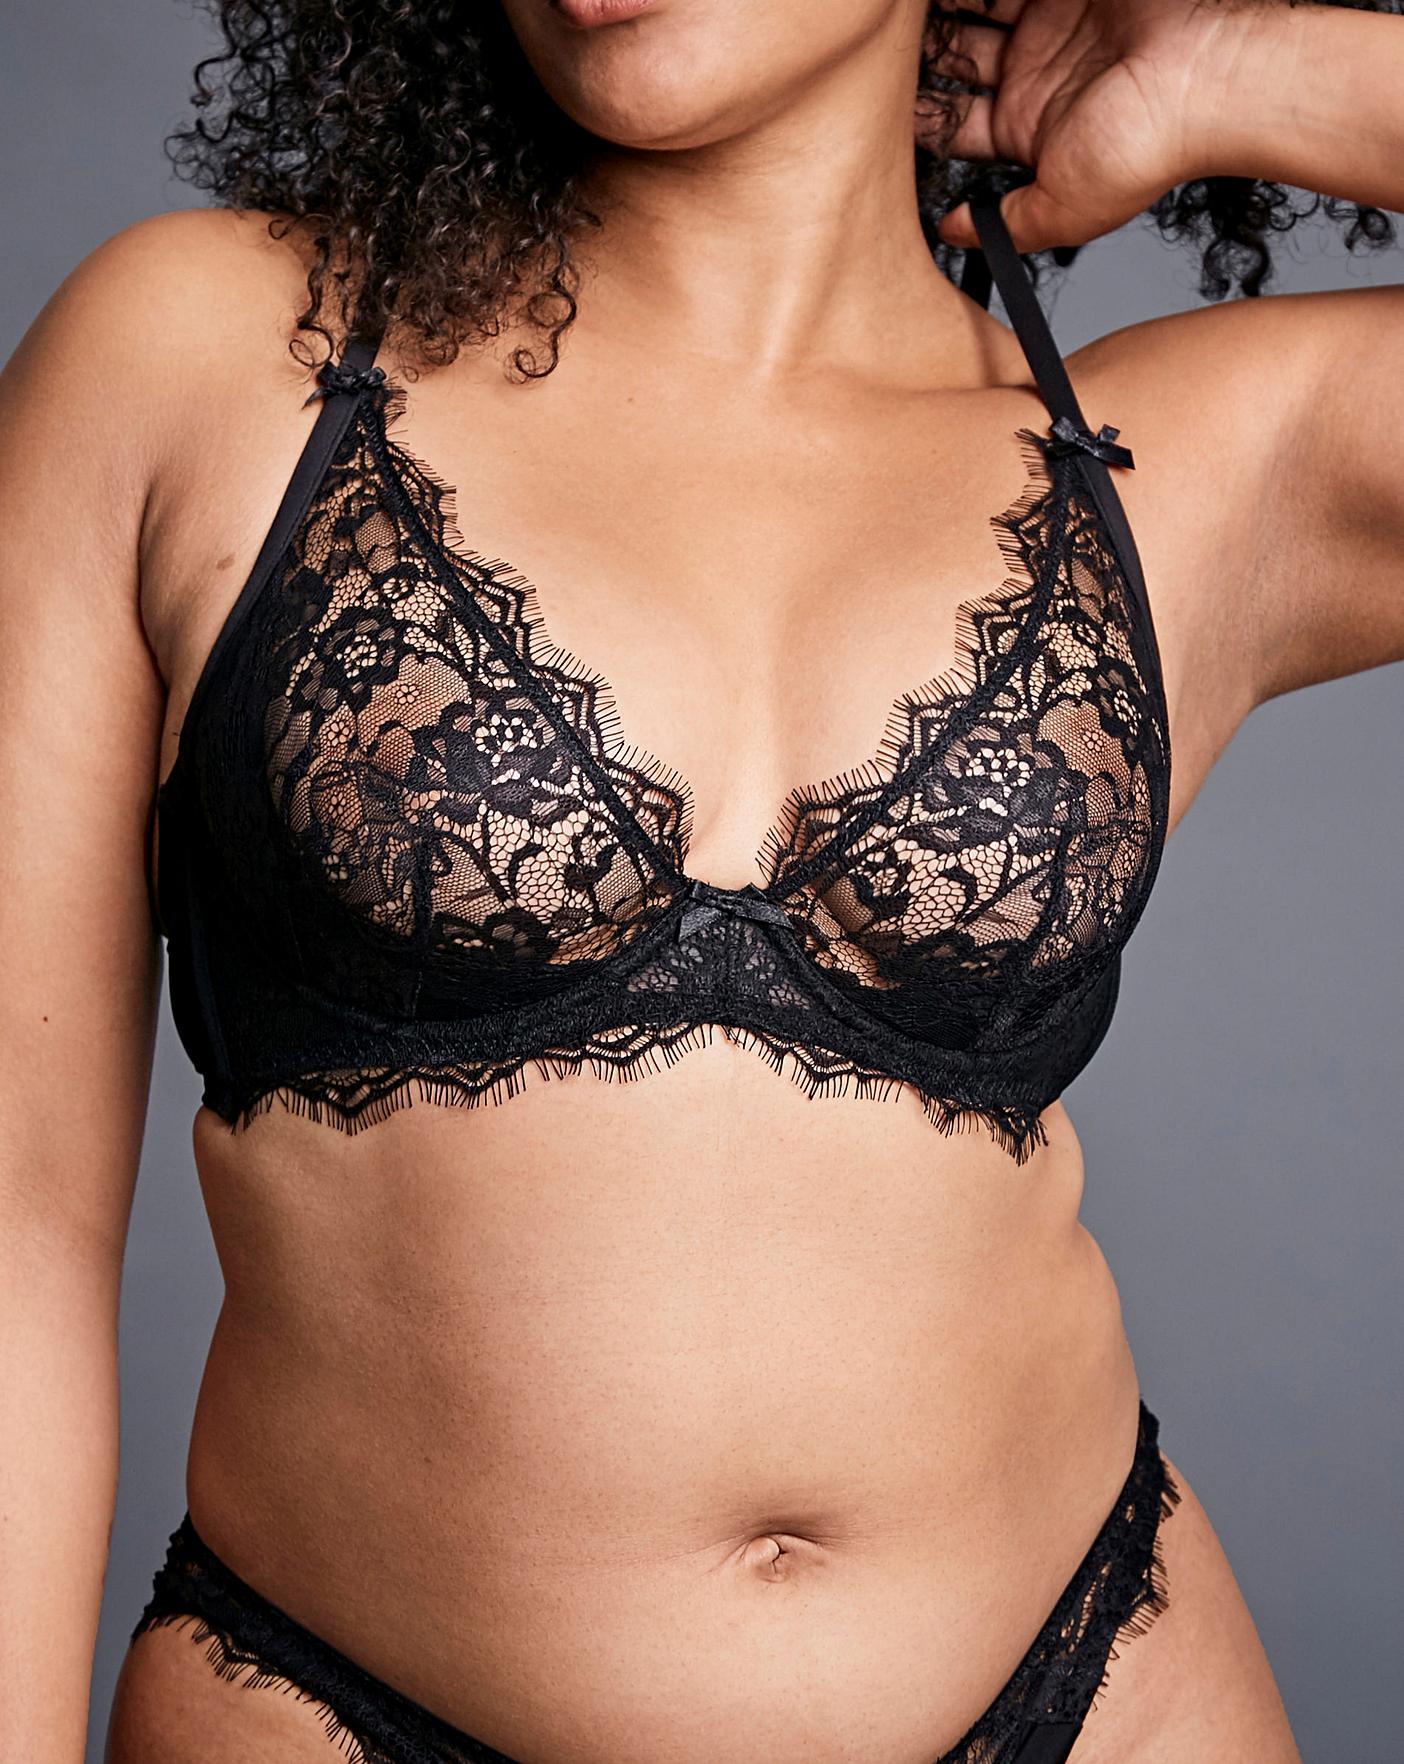 Figleaves Pulse Lace Underwired Plunge Bra B-G